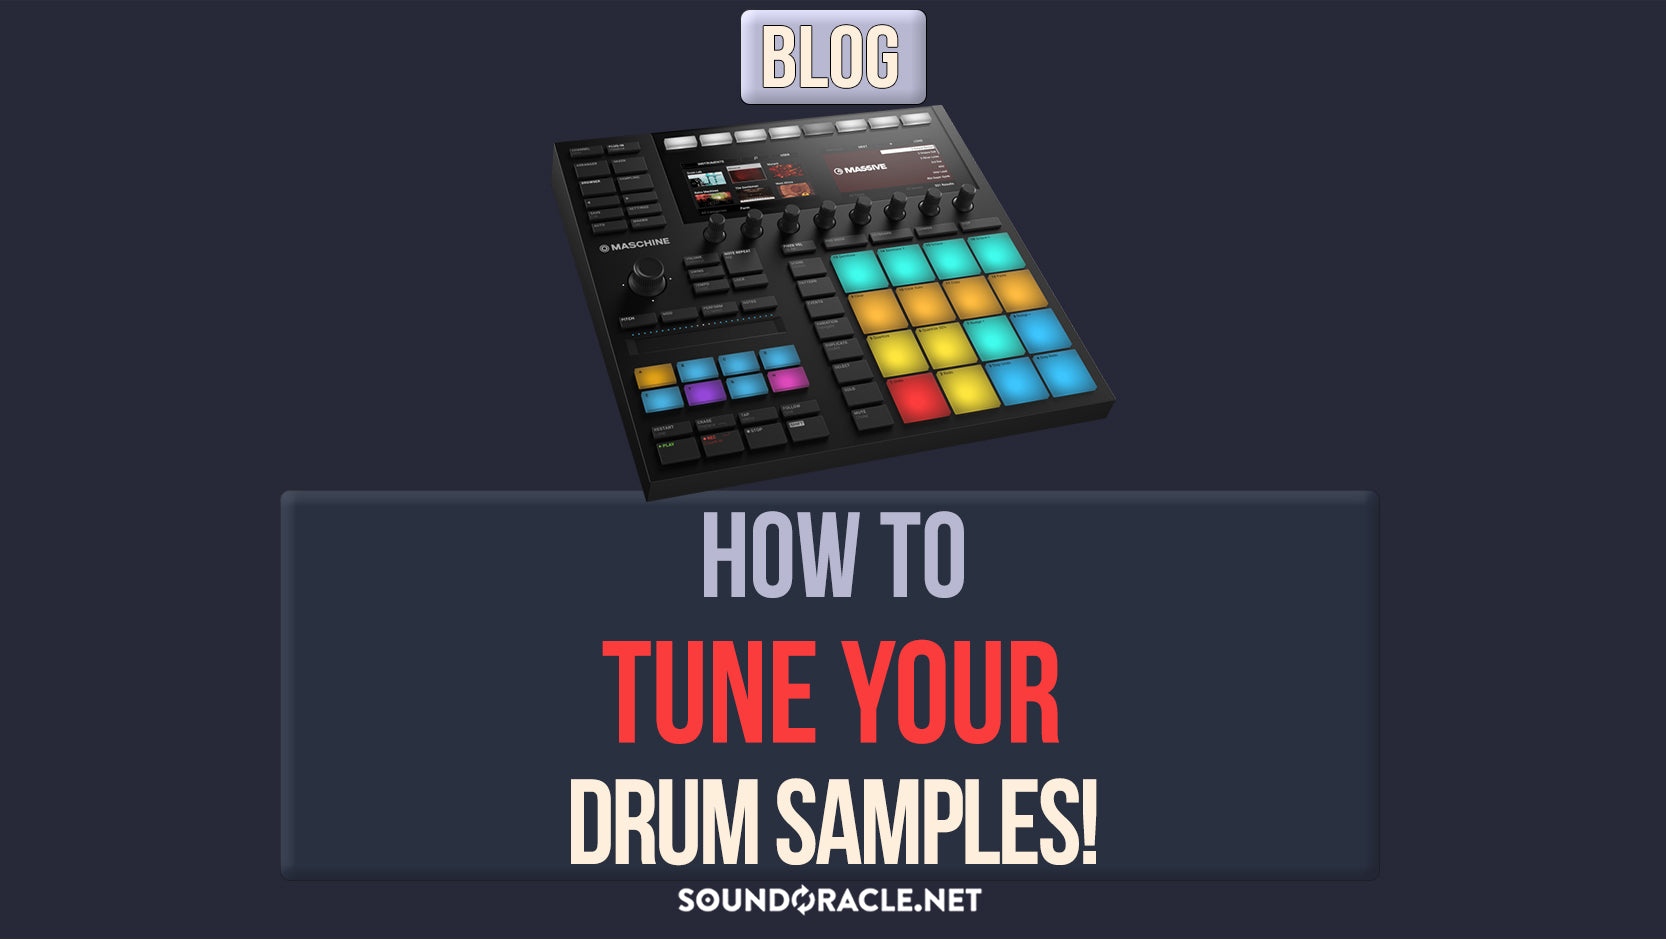 How To Tune Your Drum Samples!